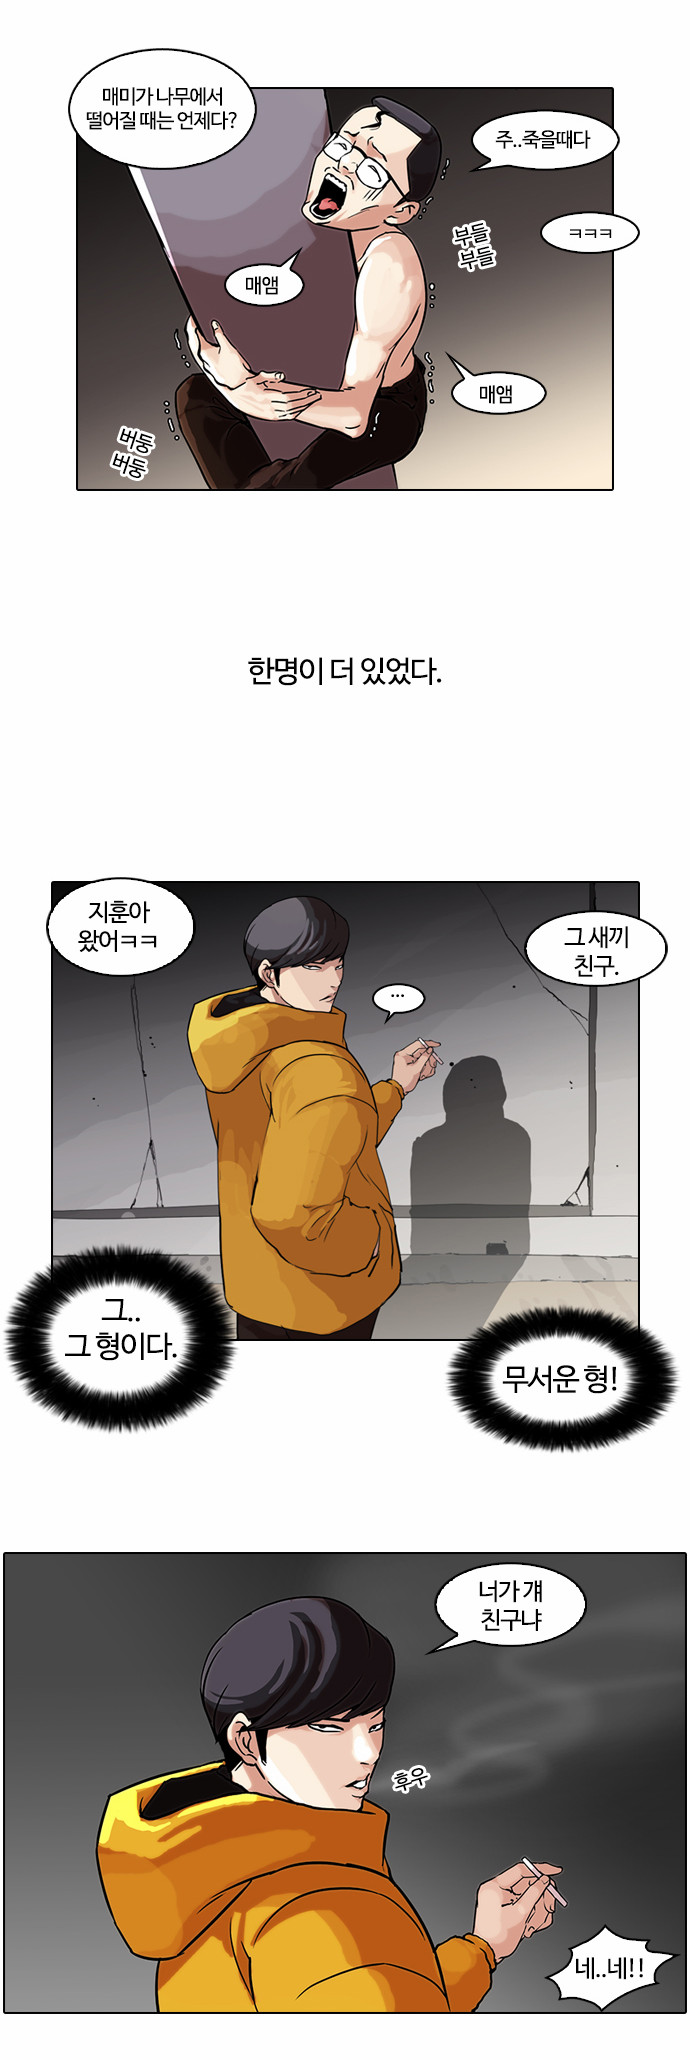 Lookism - Chapter 53 - Page 2